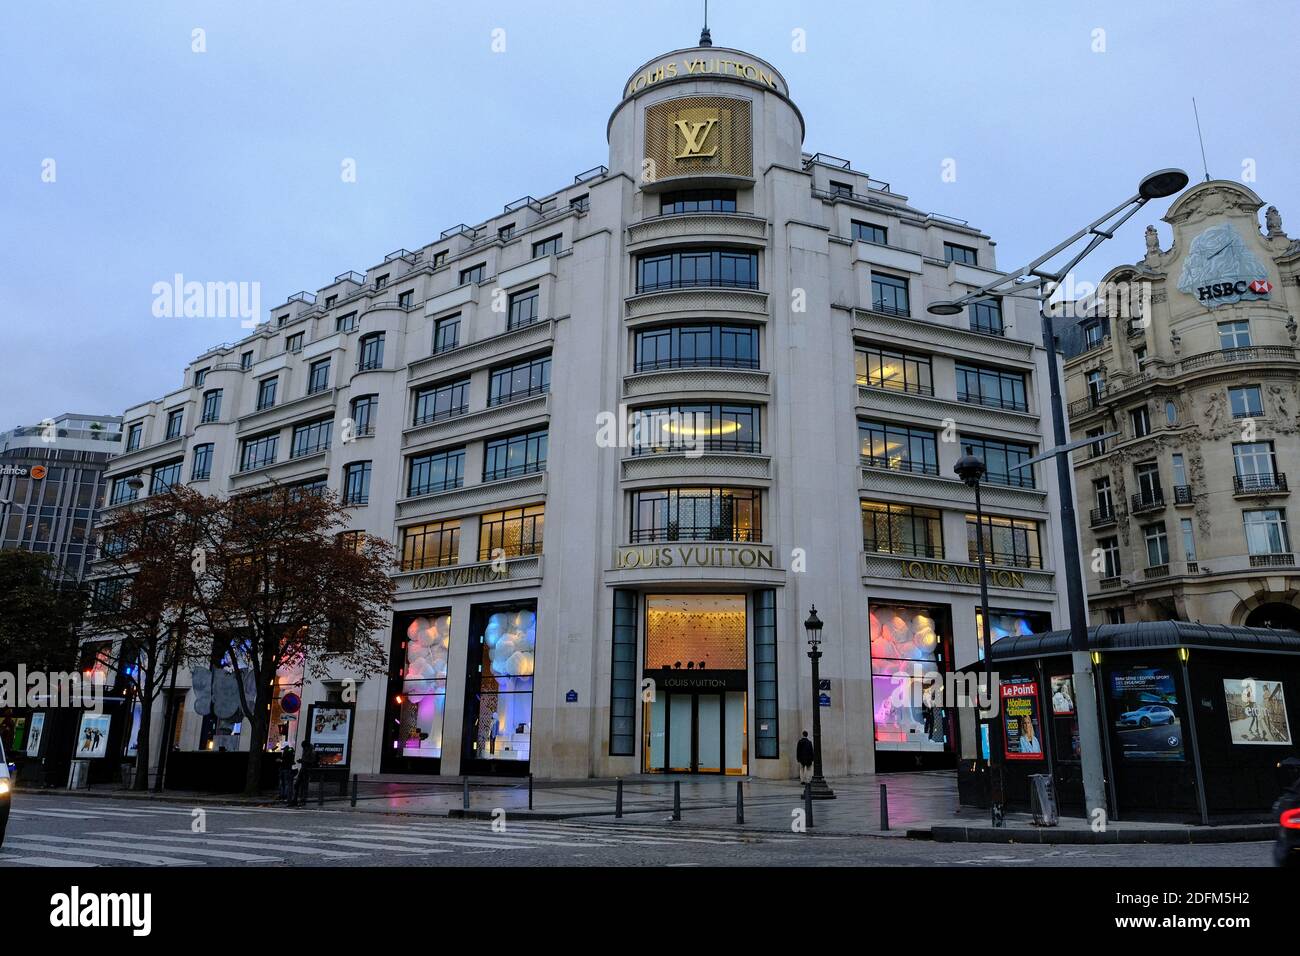 A view of Louis Vuitton flagship store at the corner of the avenue